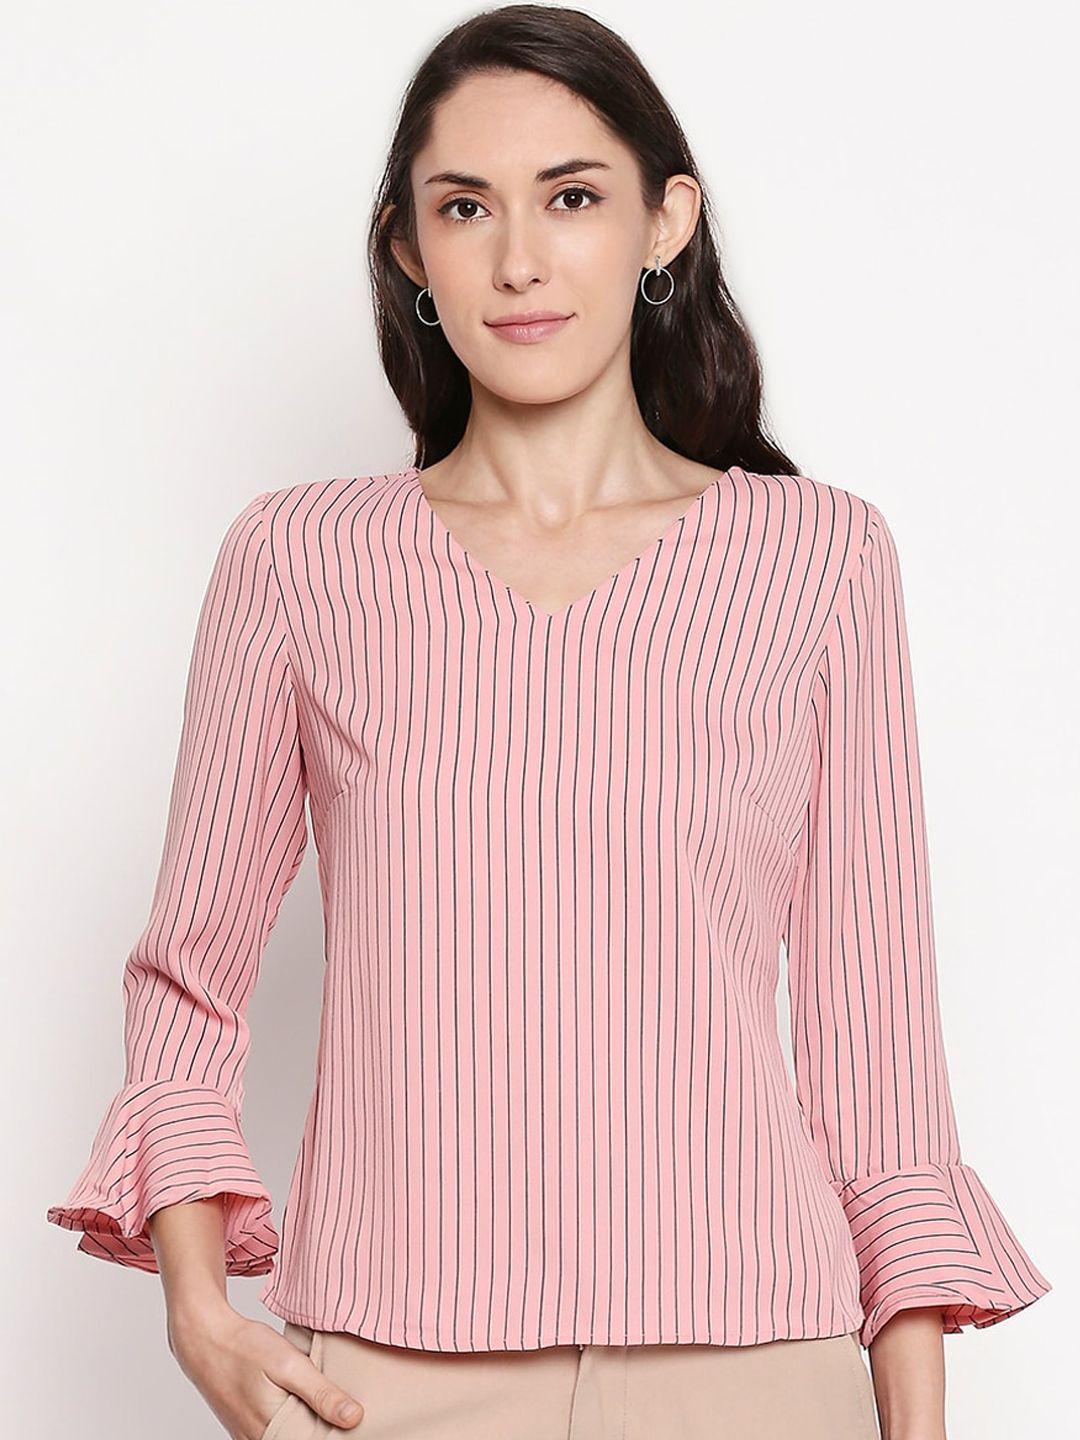 annabelle by pantaloons women pink striped top